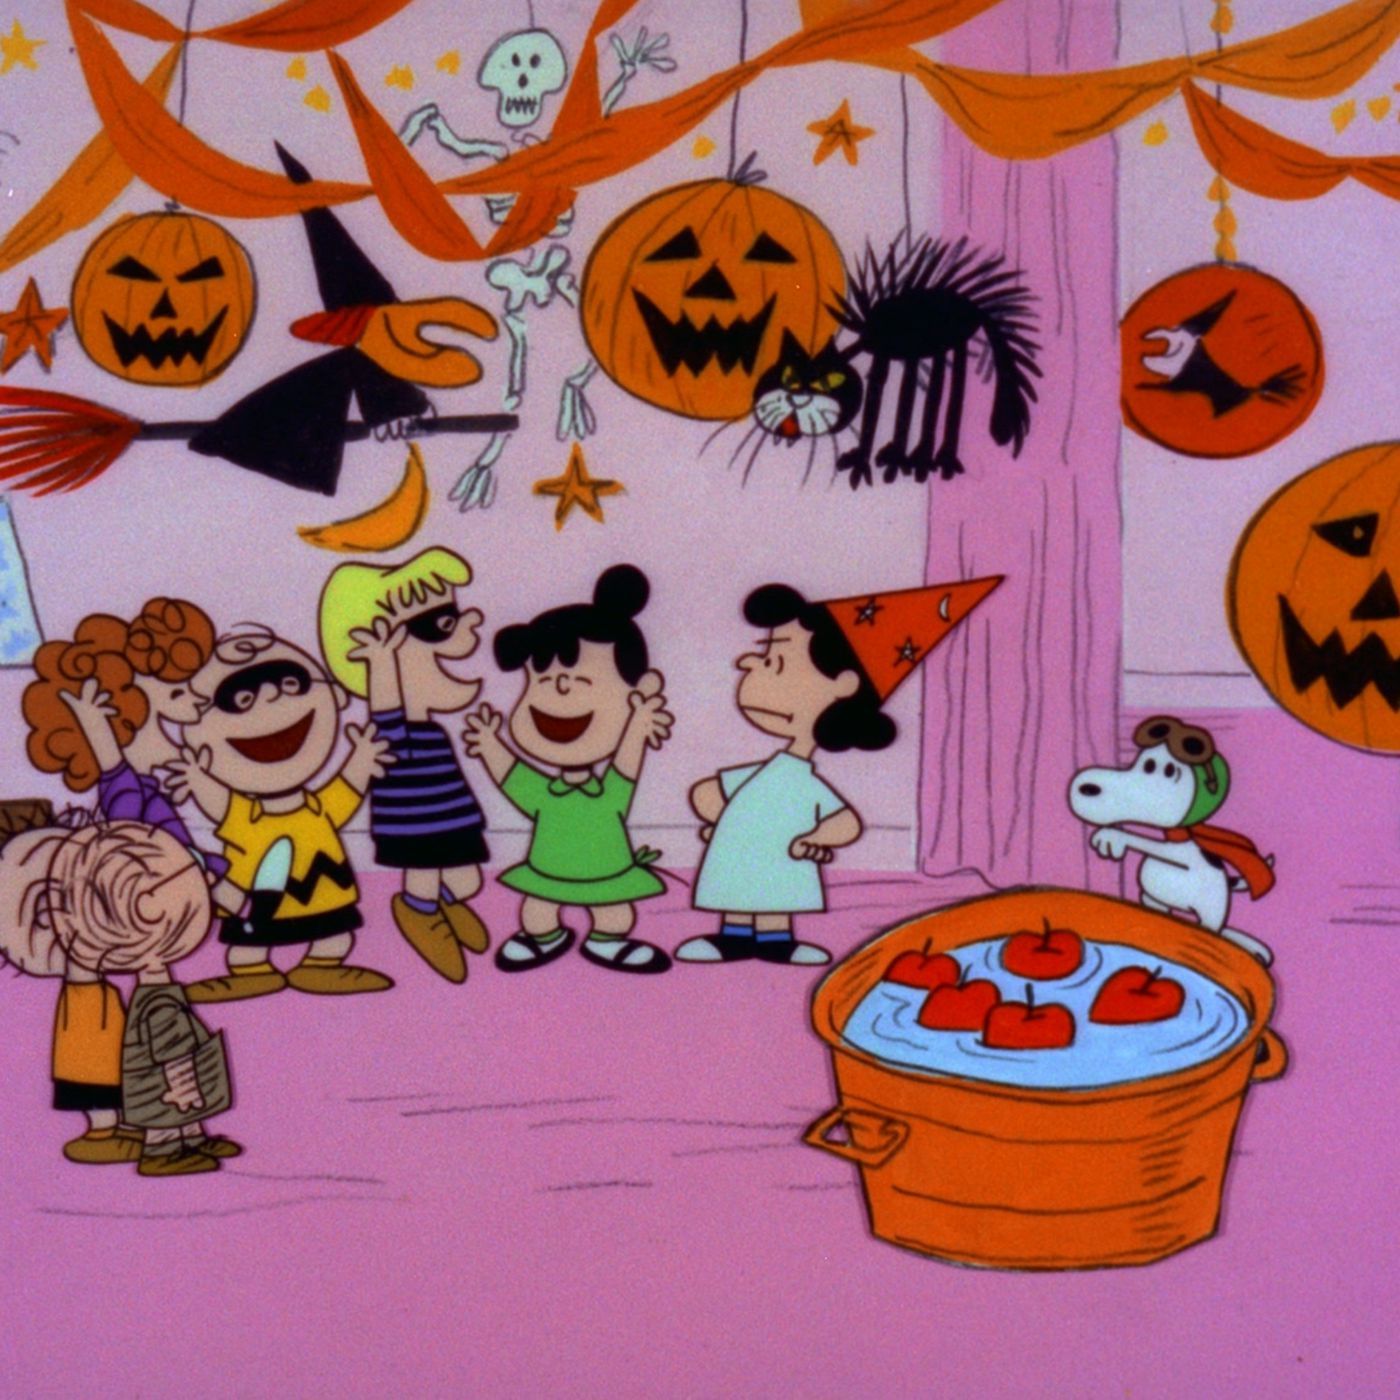 It's the Great Pumpkin, Charlie Brown isn't airing on broadcast TV. It's on AppleTV+